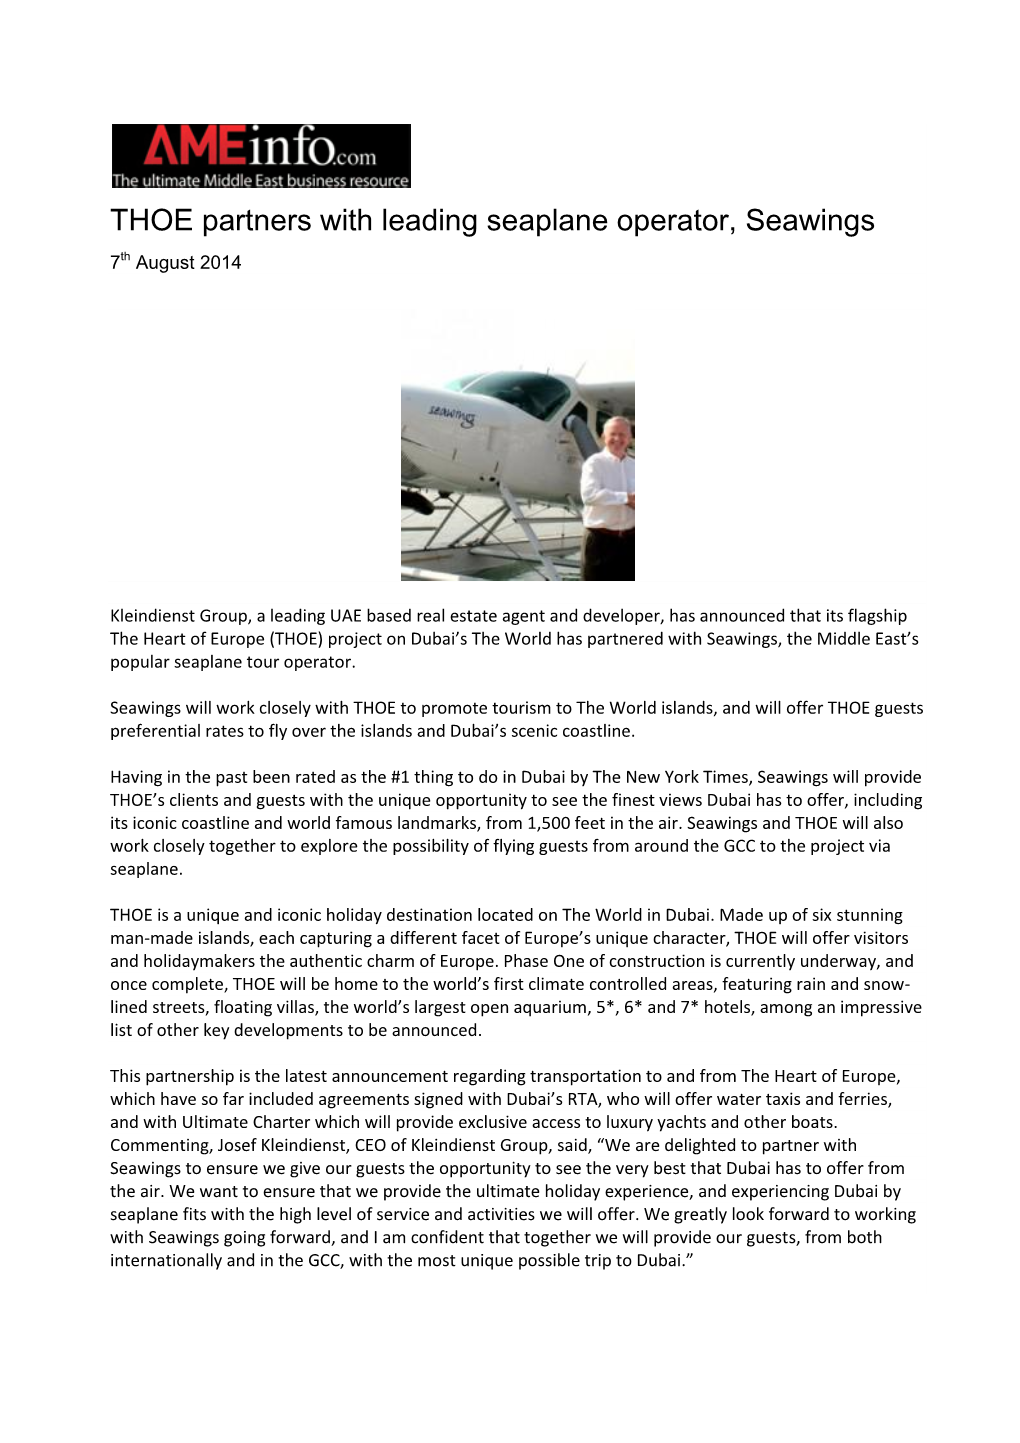 THOE Partners with Leading Seaplane Operator, Seawings 7Th August 2014